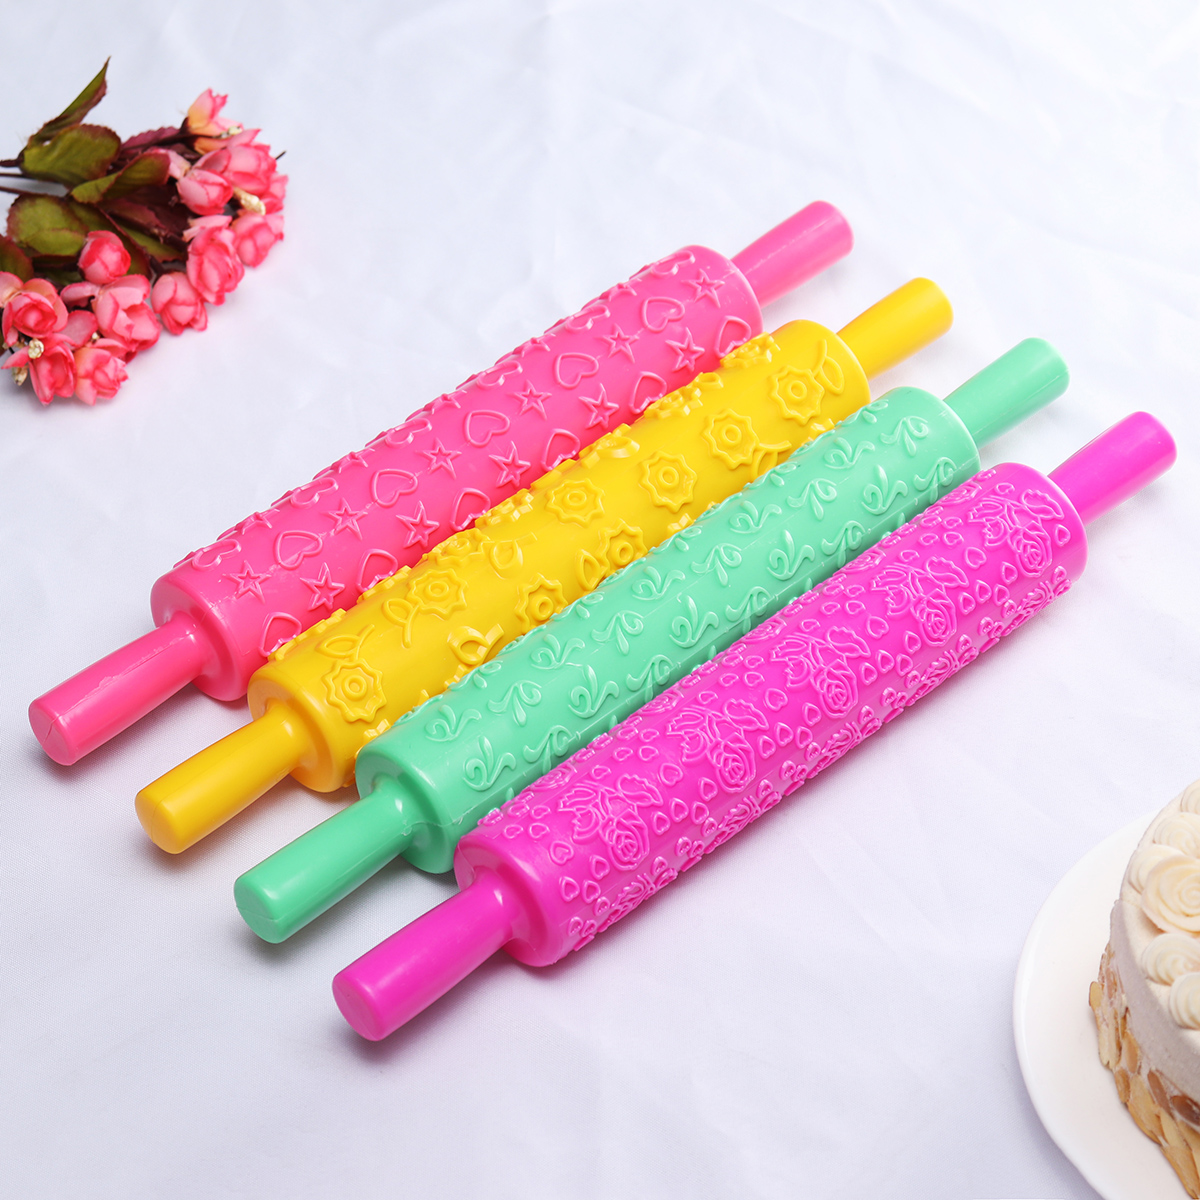 Baking-Rolling-Pin-Christmas-Creative-Baking-Biscuits-Cookie-Rolling-Rod-Pin-Printing-Mold-1410720-1